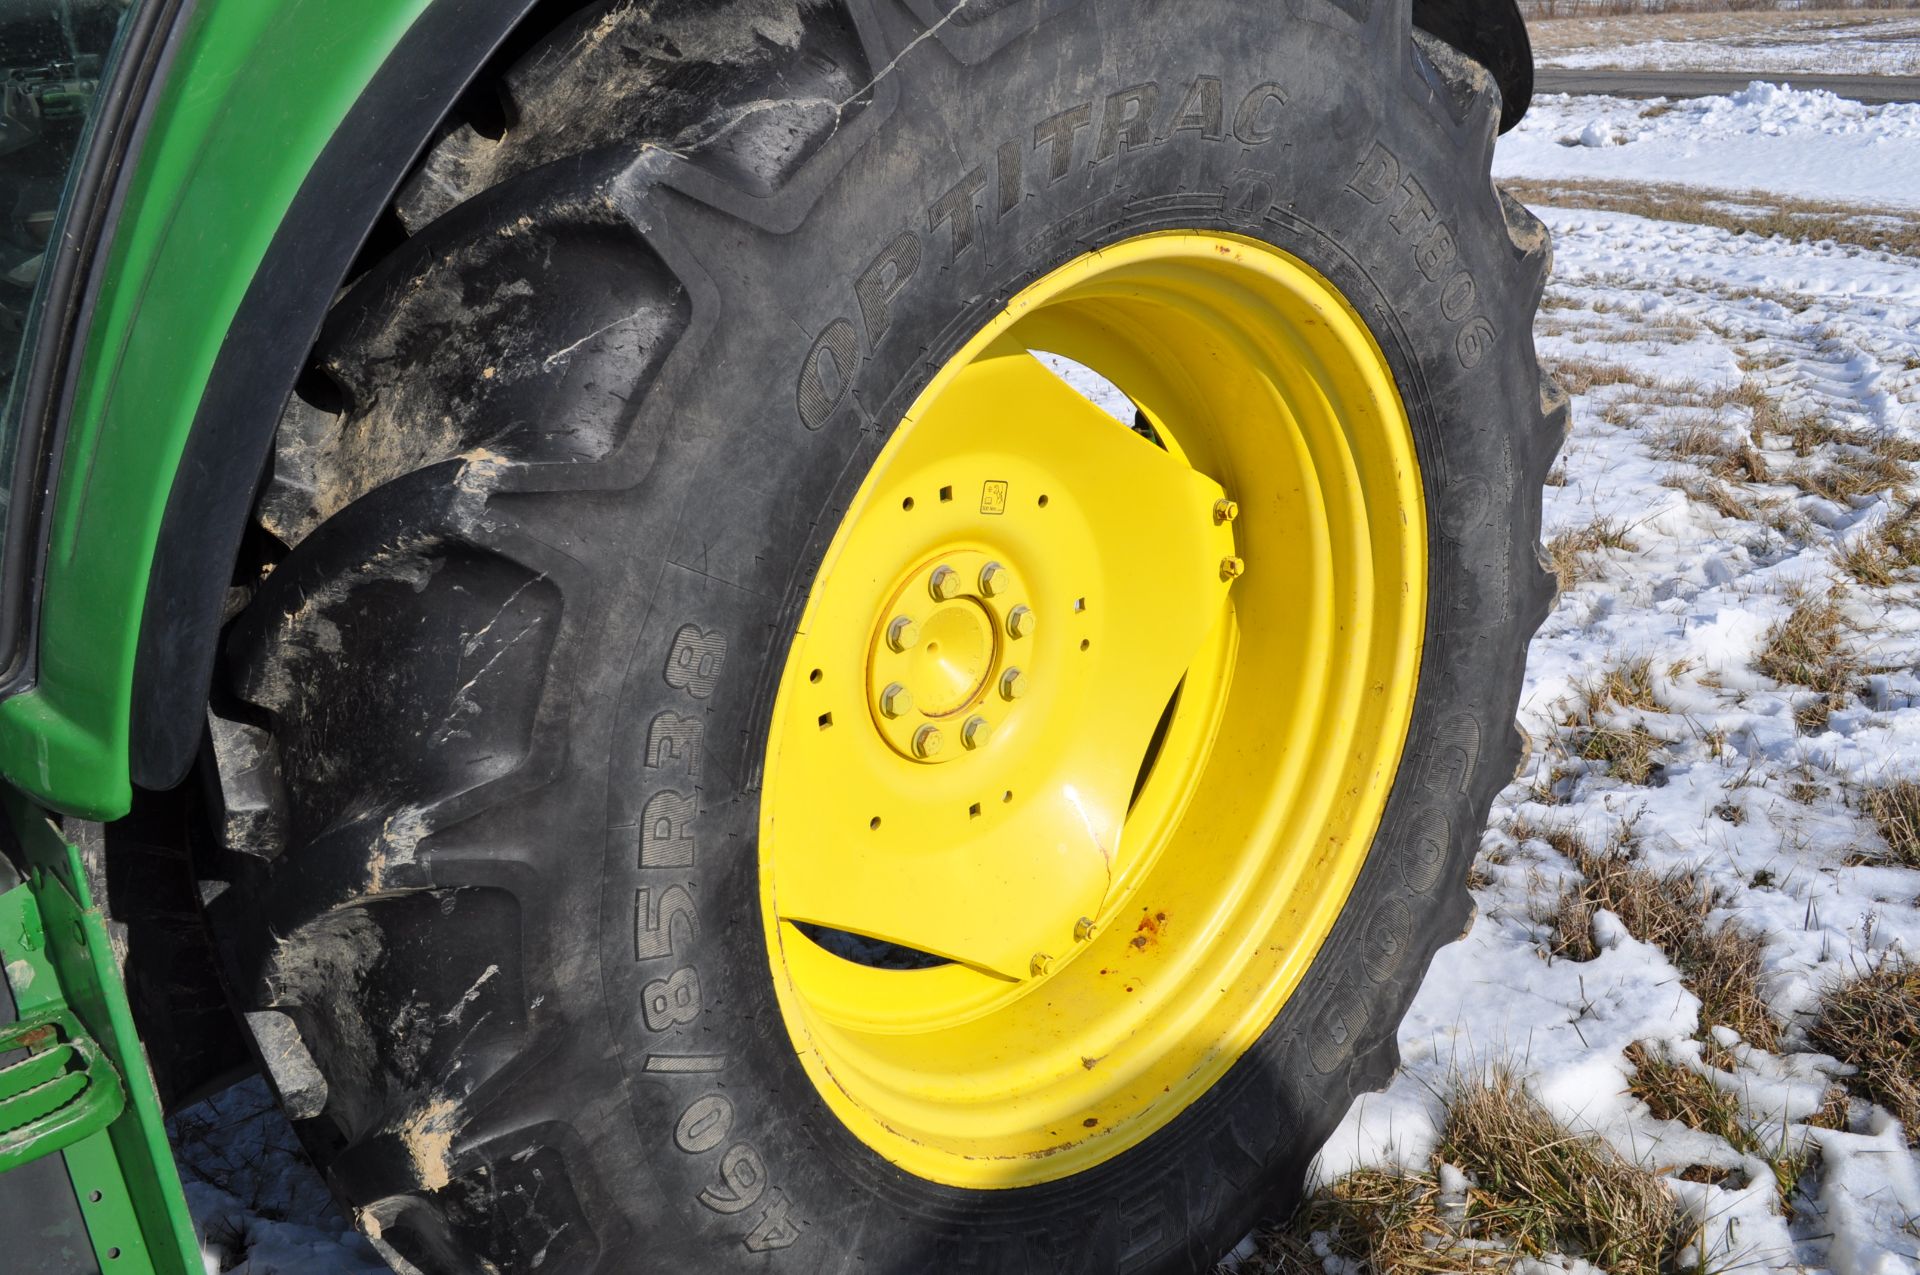 John Deere 6430 tractor, MFWD, C/H/A, 6x4 trans, 460/85R38 rear, 420/85R24 front, front fenders, - Image 16 of 36